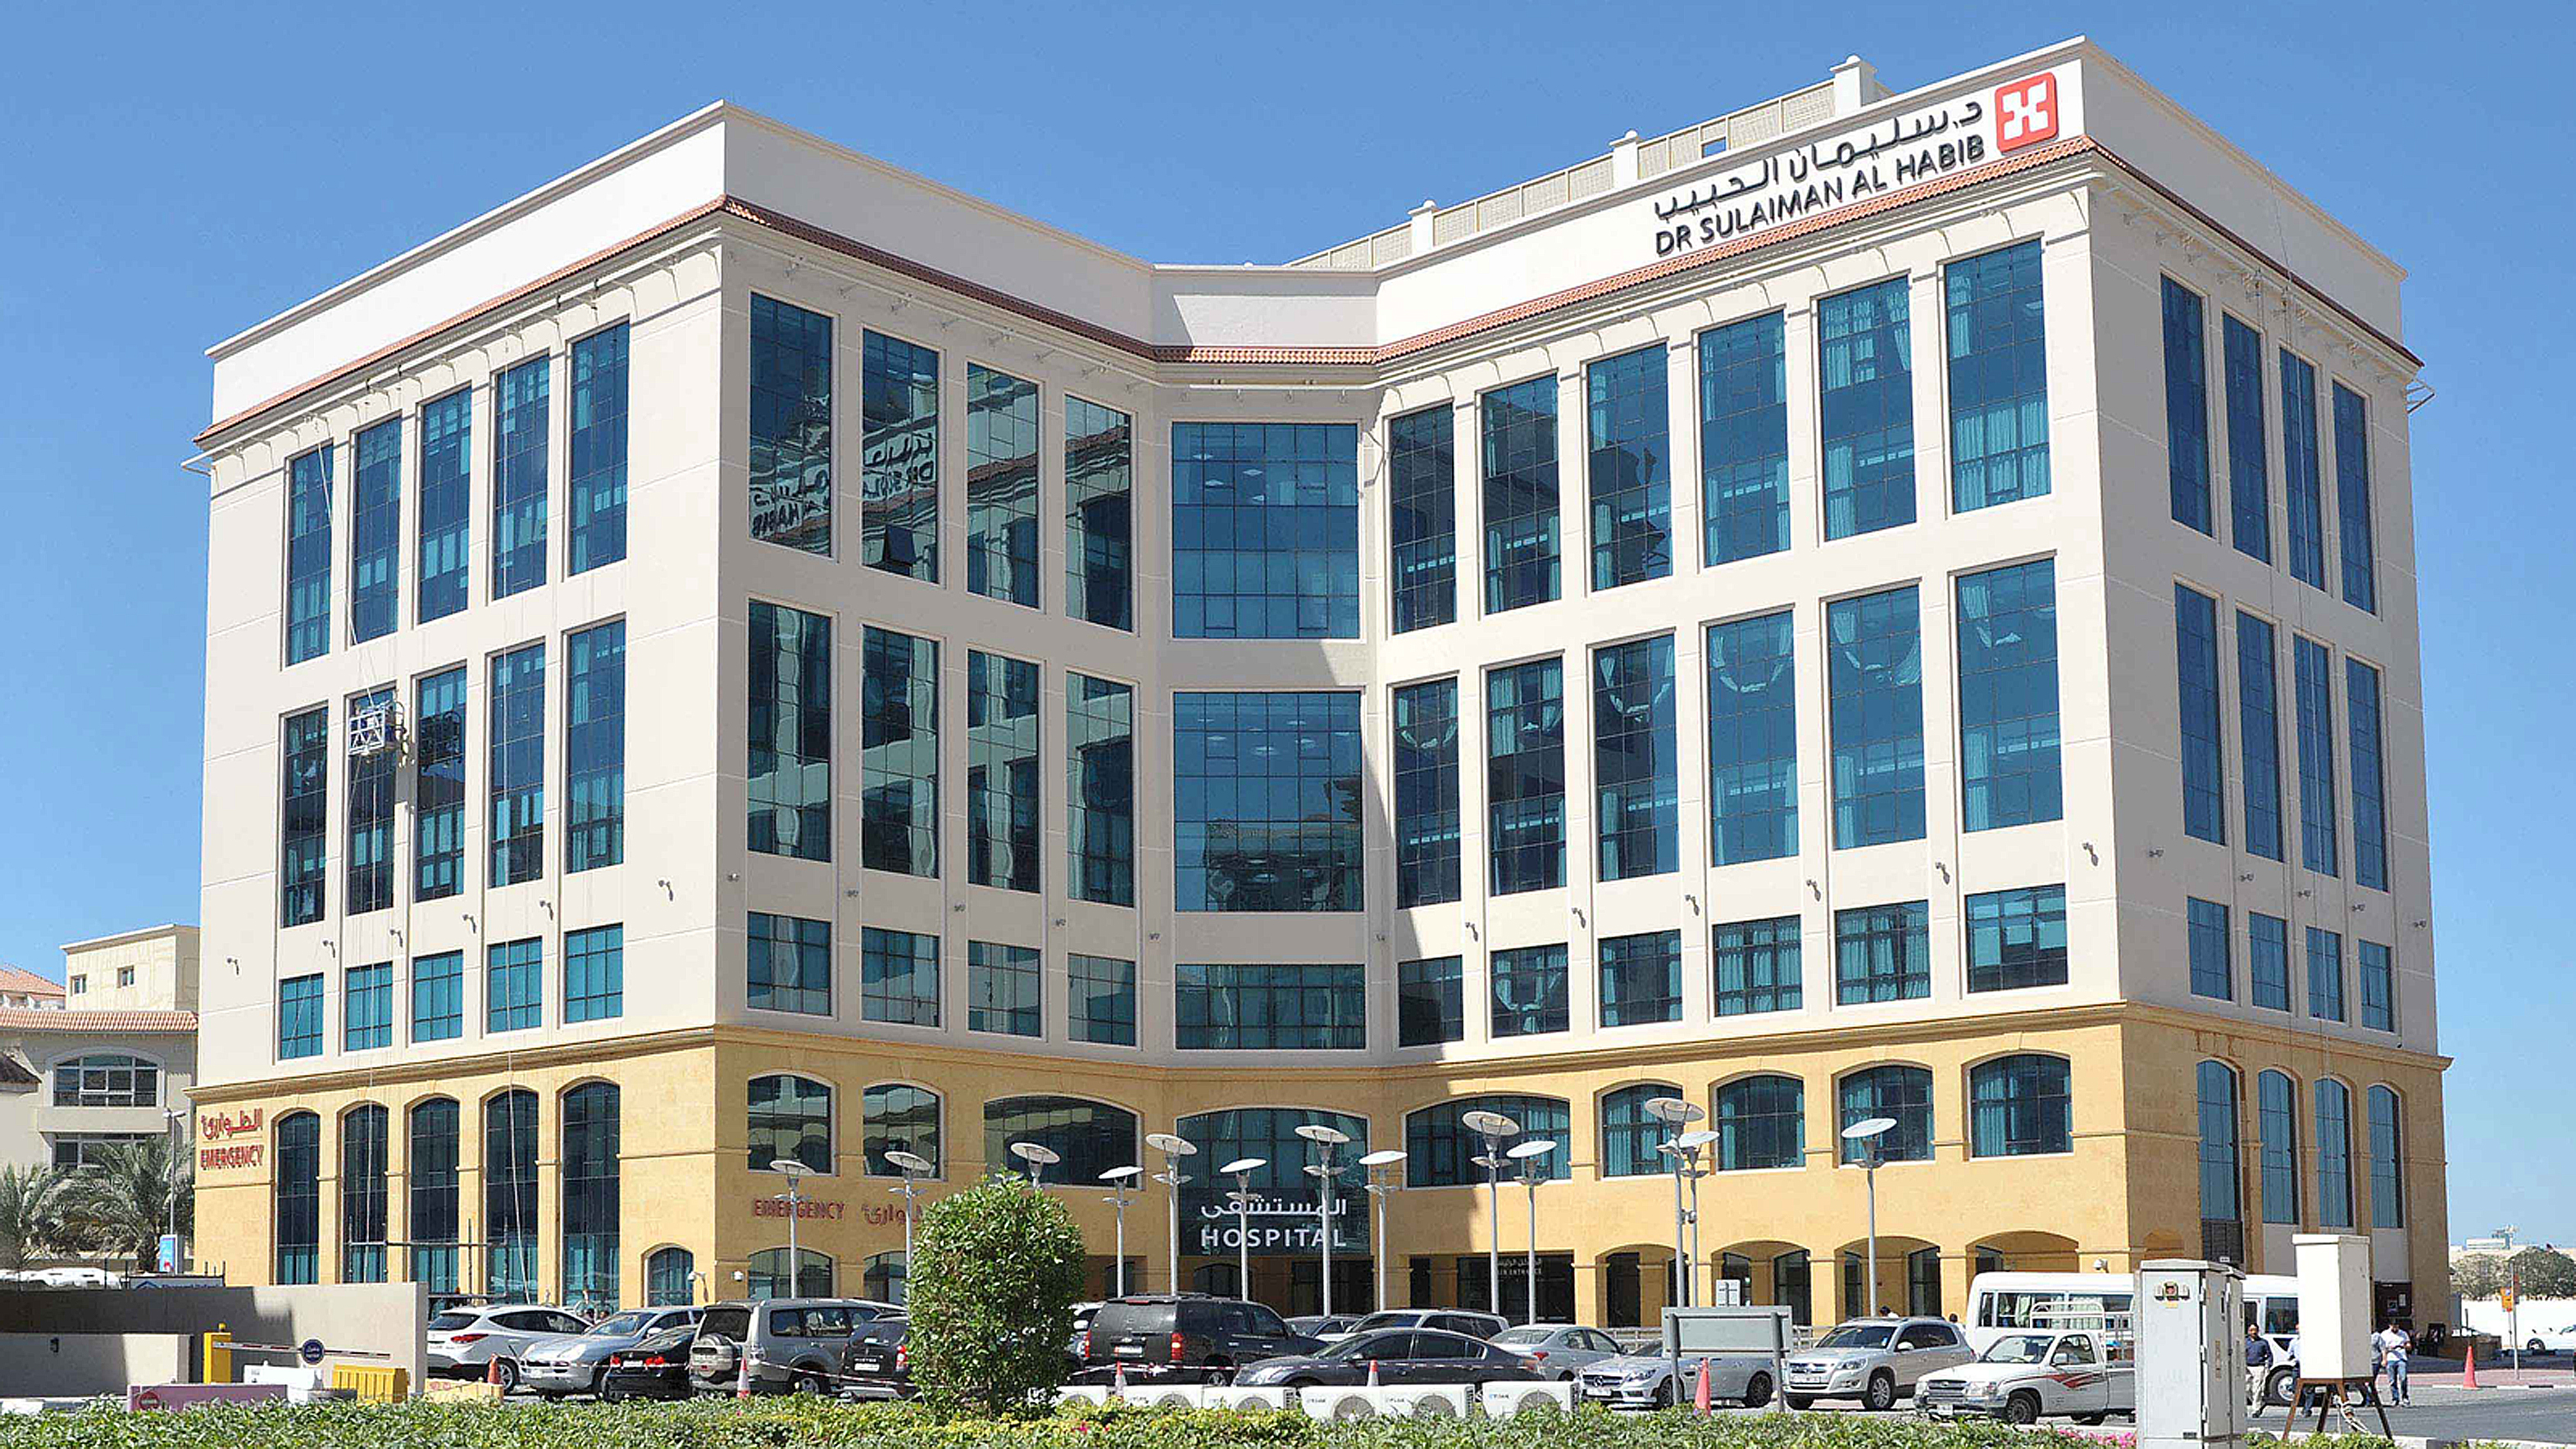 The building of the hospital in the Middle East